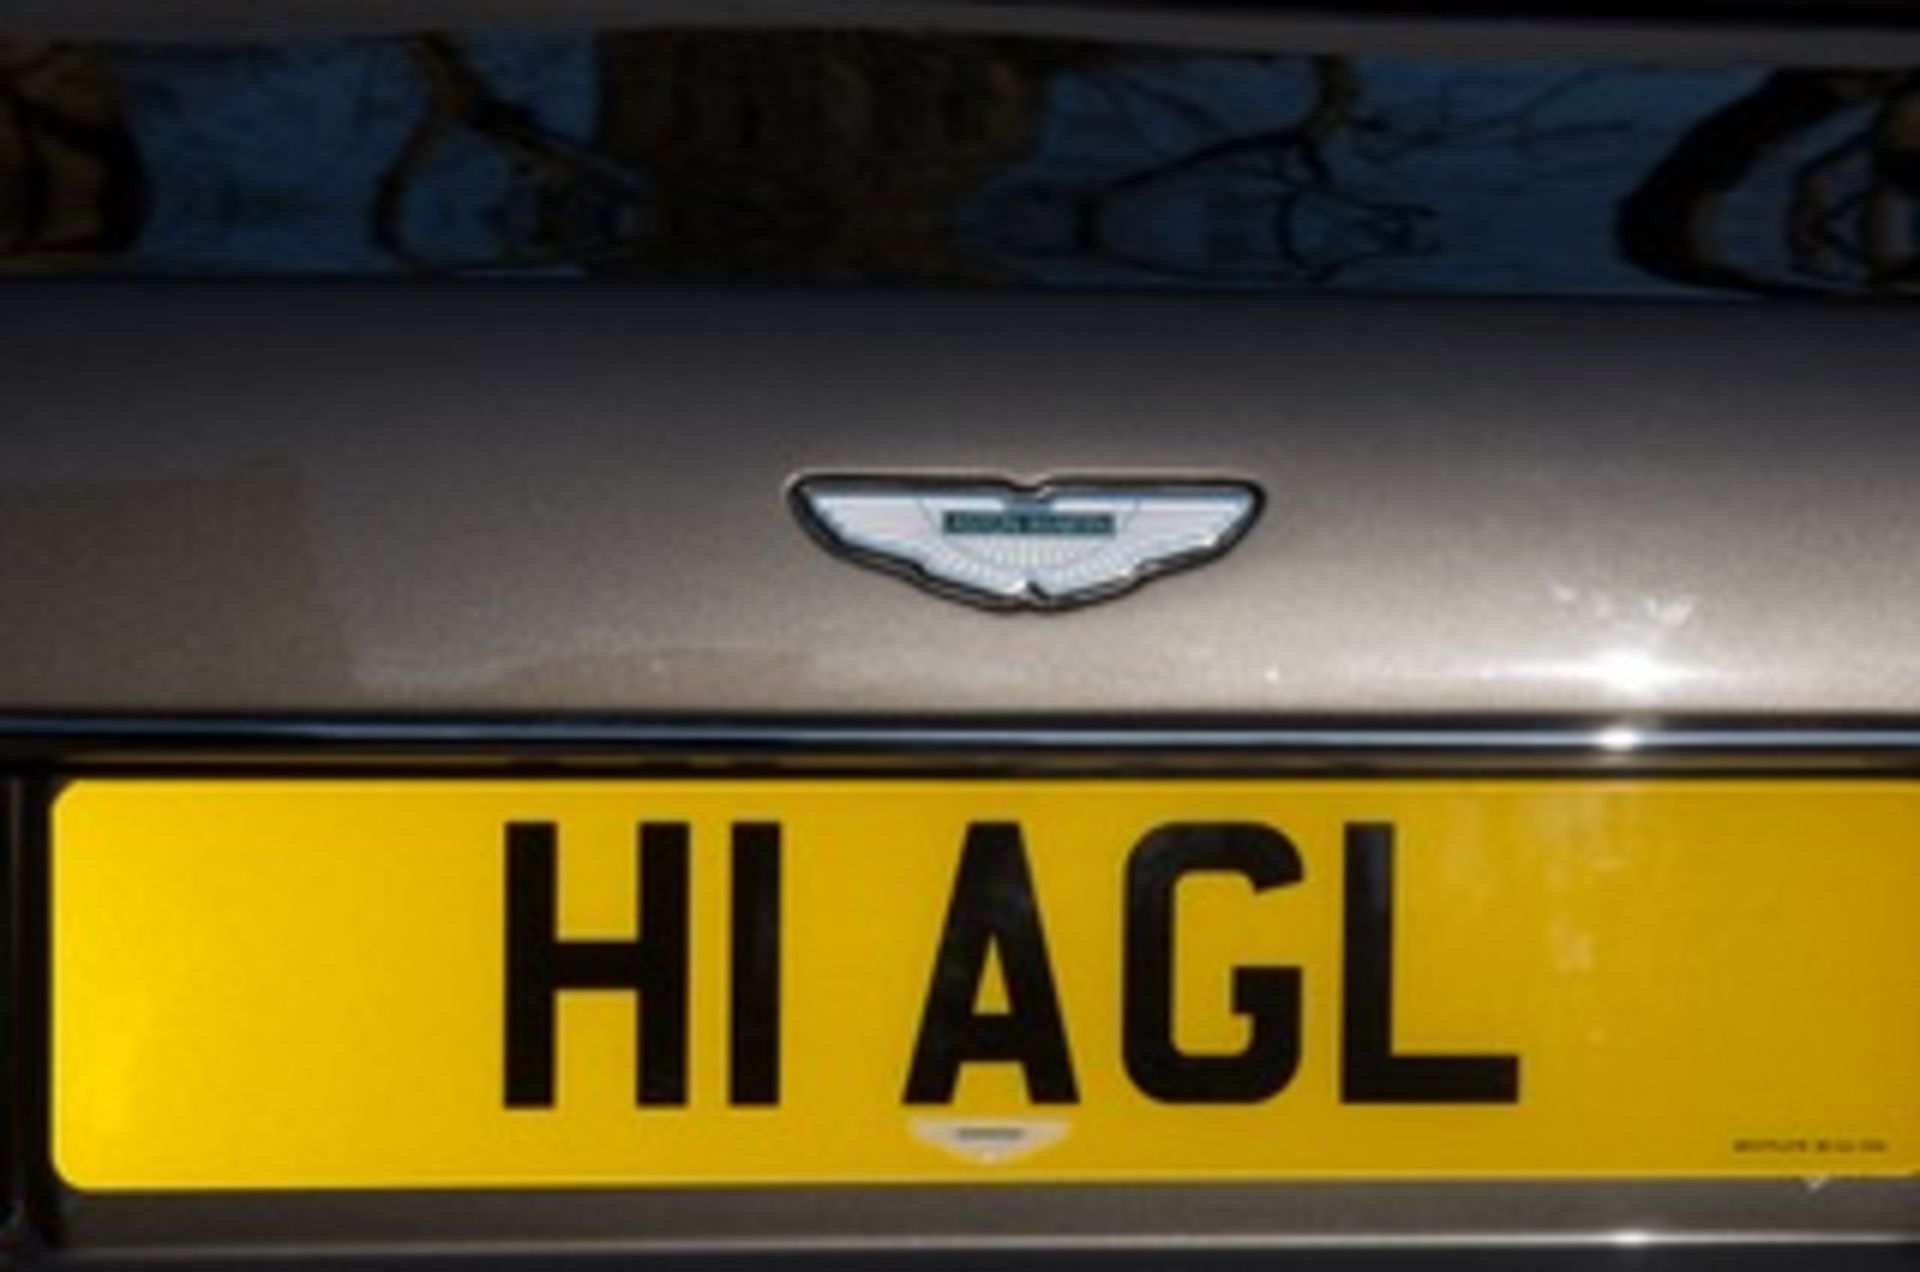 1993 Aston Martin Virage Volante - Having 11 months MOT and aviators number plate H1 AGL - Image 23 of 48